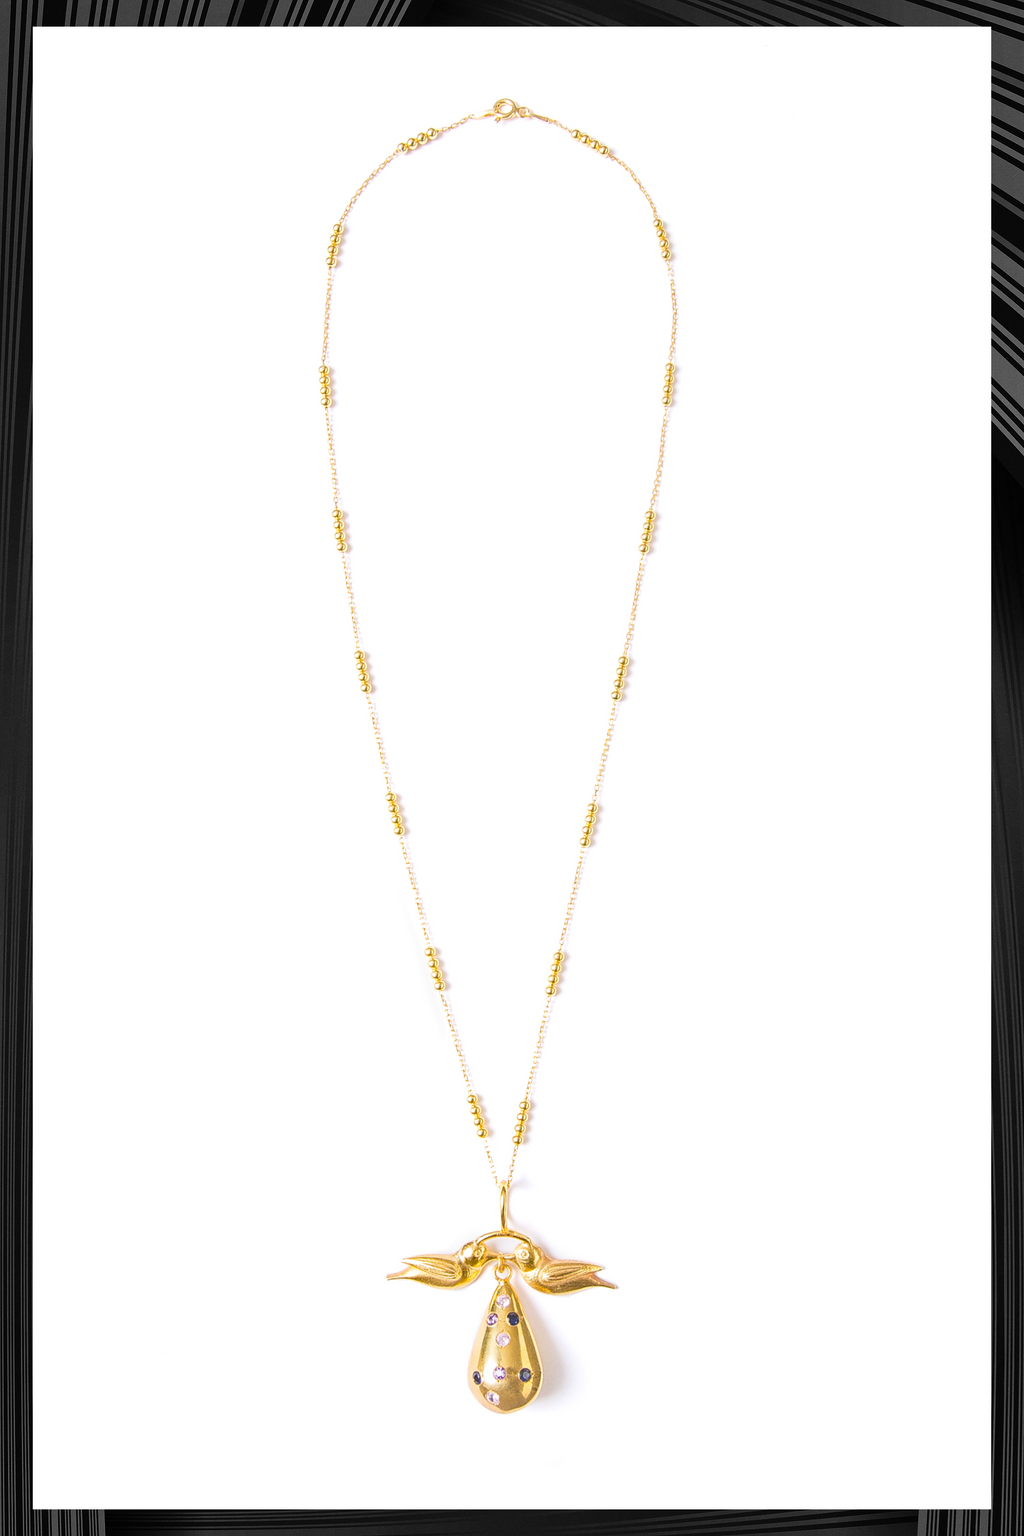 Tear Drop Gold Birds Necklace | Free Delivery - Quick Shipping